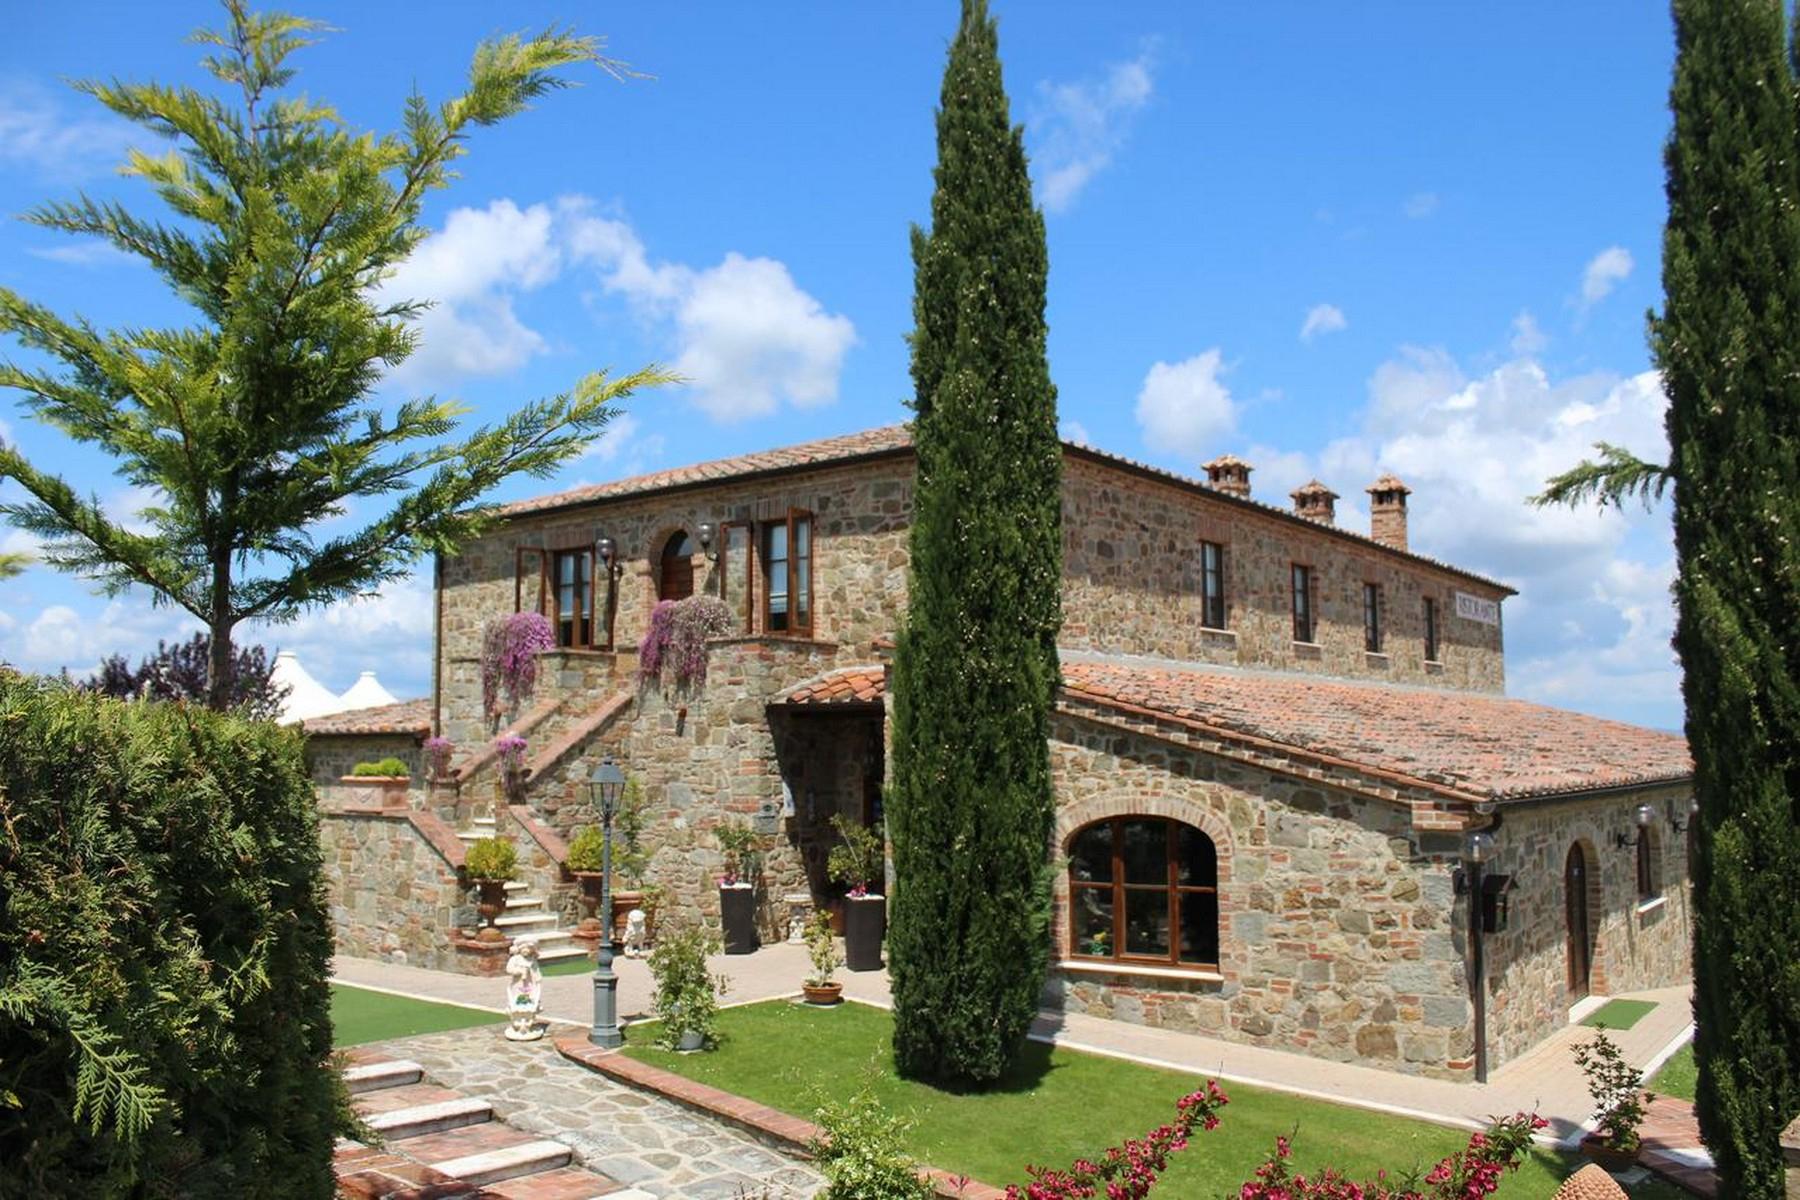 Beautiful Boutique Hotel with Restaurant and SPA in the hills of Torrita di Siena - 1